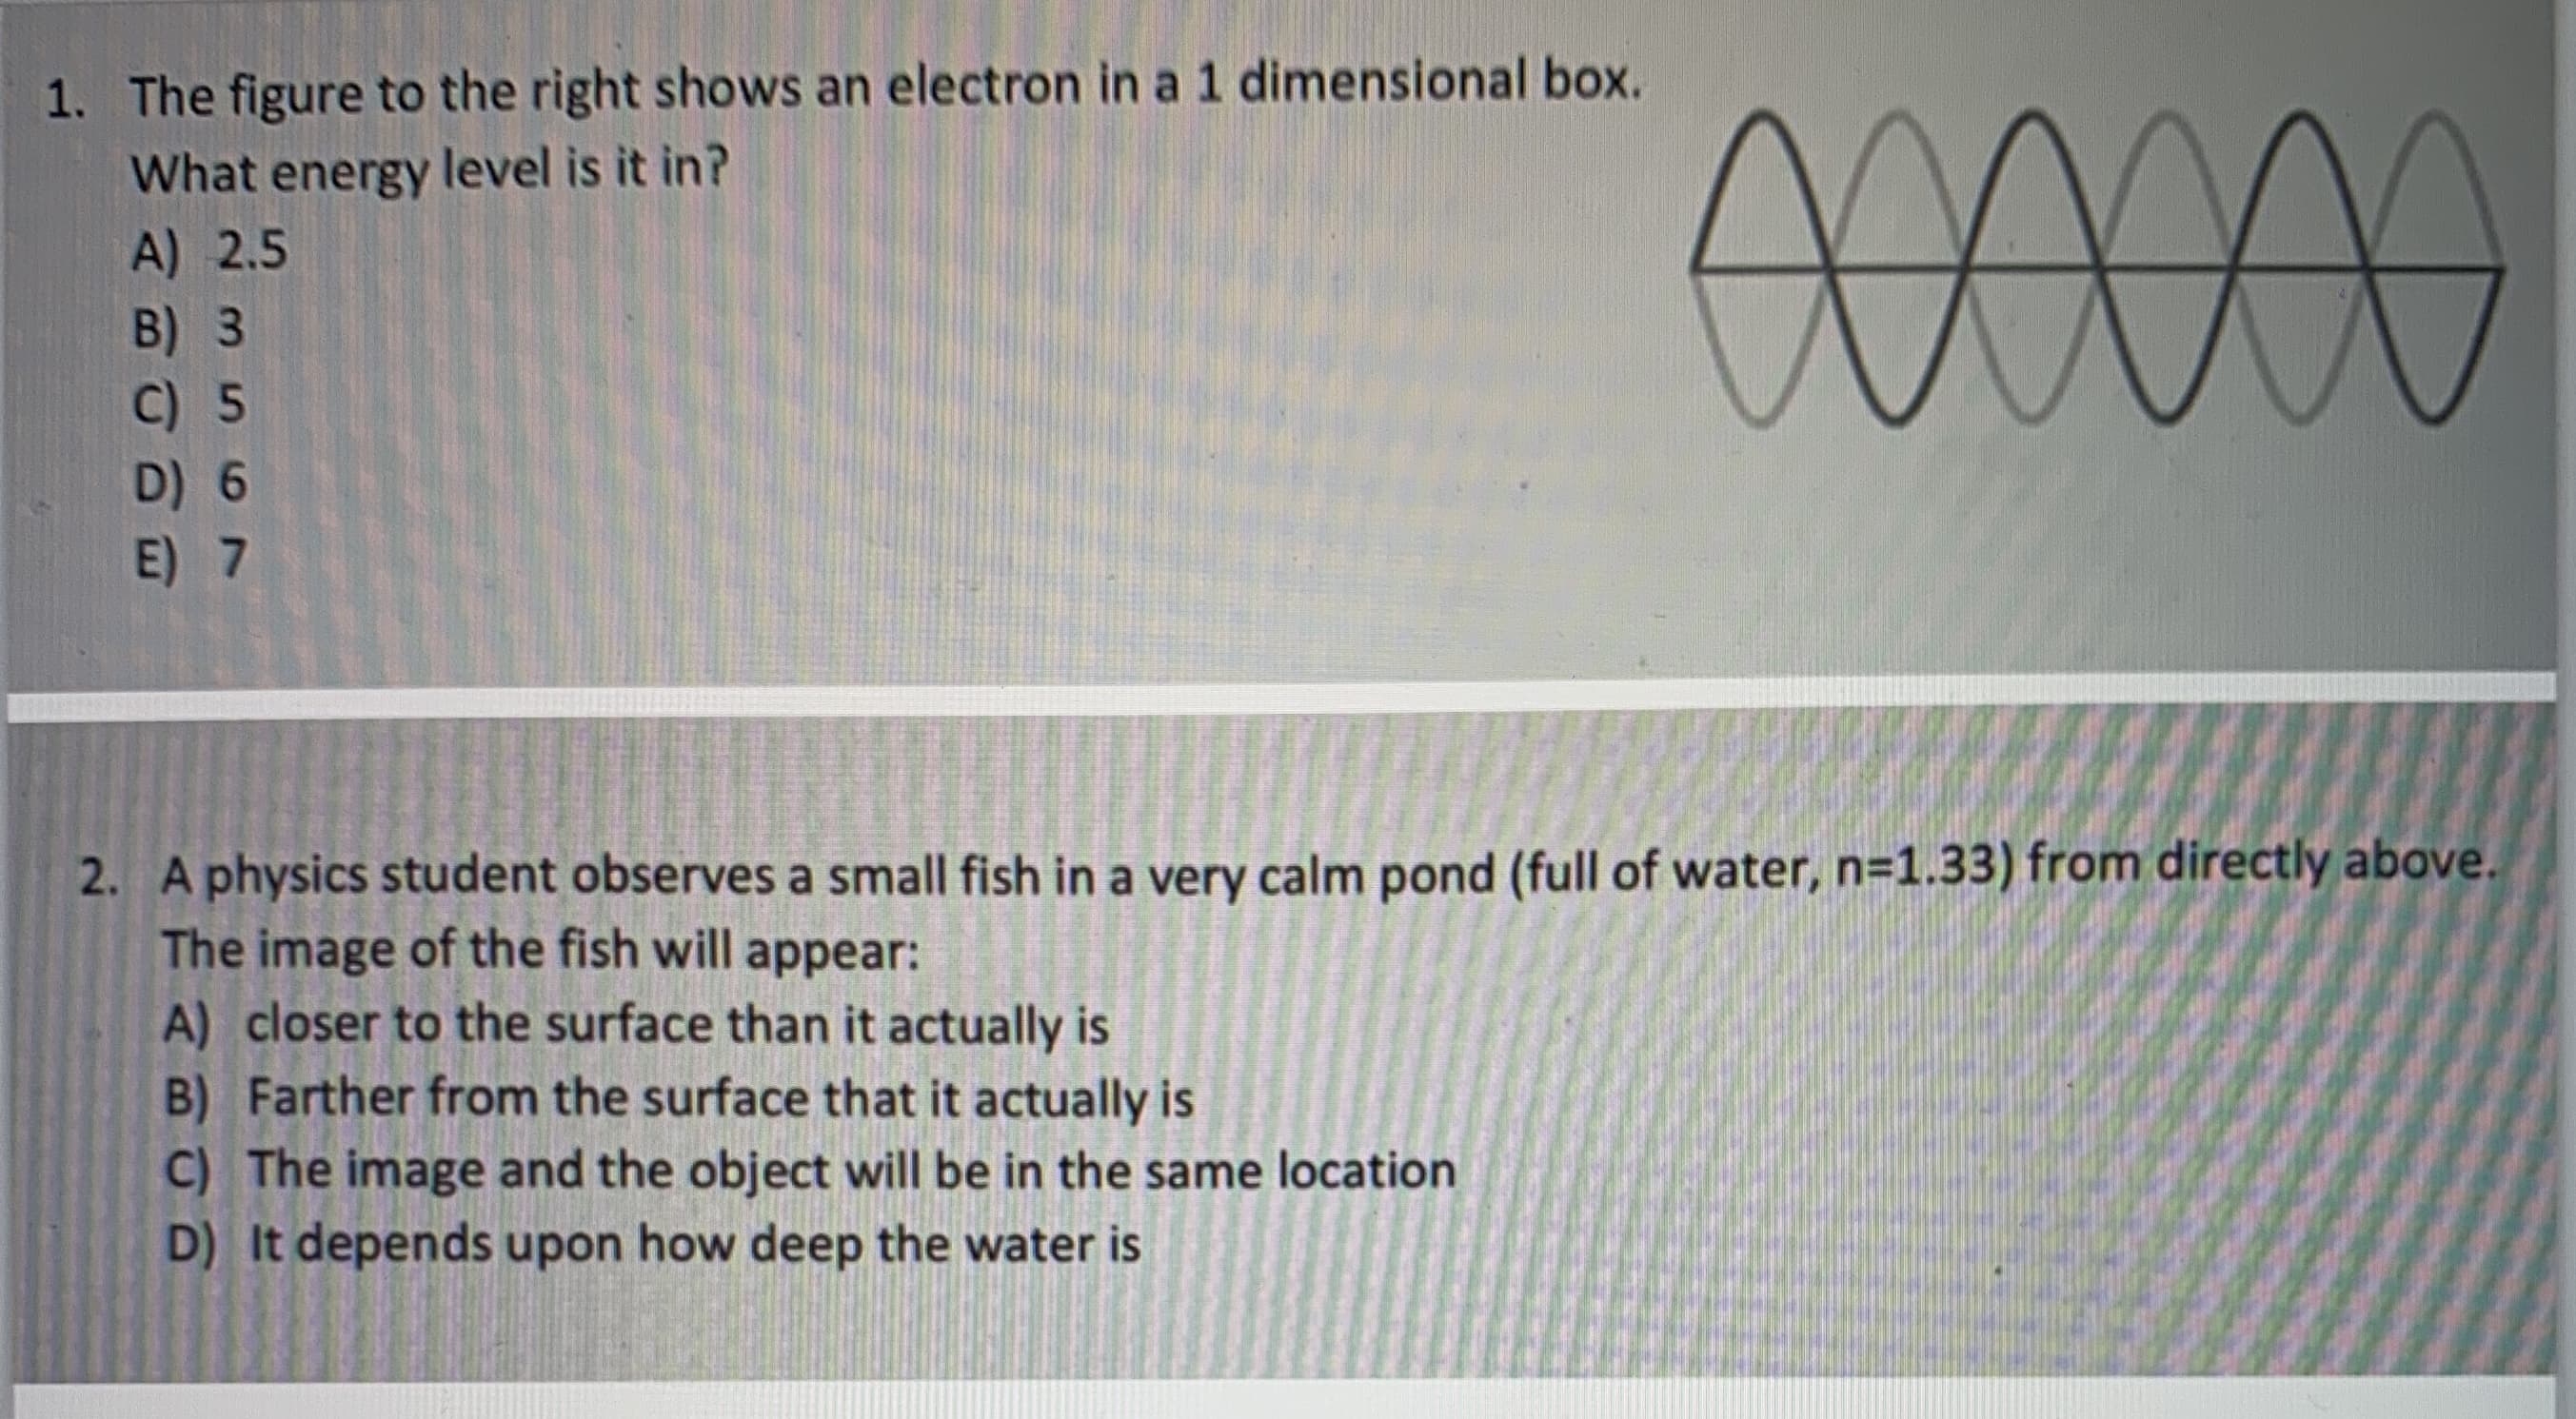 1. The figure to the right shows an electron in a 1 dimensional box.
What energy level is it in?
A) 2.5
B) 3
C) 5
00000
D) 6
E) 7
.
2. A physics student observes a small fish in a very calm pond (full of water, n=1.33) from directly above.
The image of the fish will appear:
A) closer to the surface than it actually is
B) Farther from the surface that it actually is
C) The image and the object will be in the same location
D) It depends upon how deep the water is
